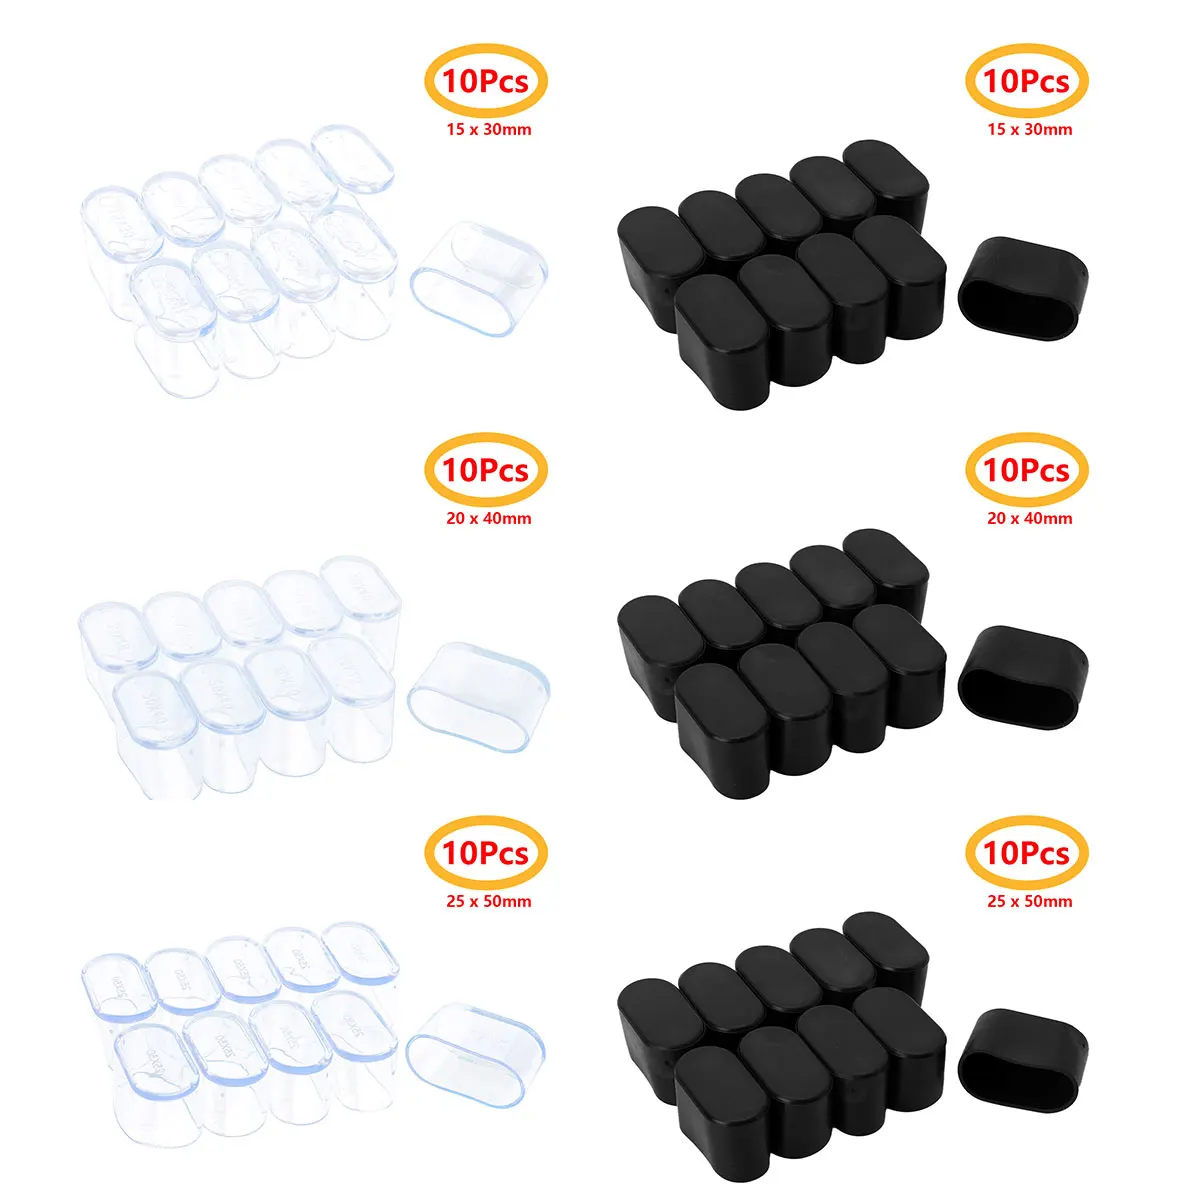 10xChair Leg Cap Rubber Feet Protector Pads Furniture Table Covers-Round Bottom 